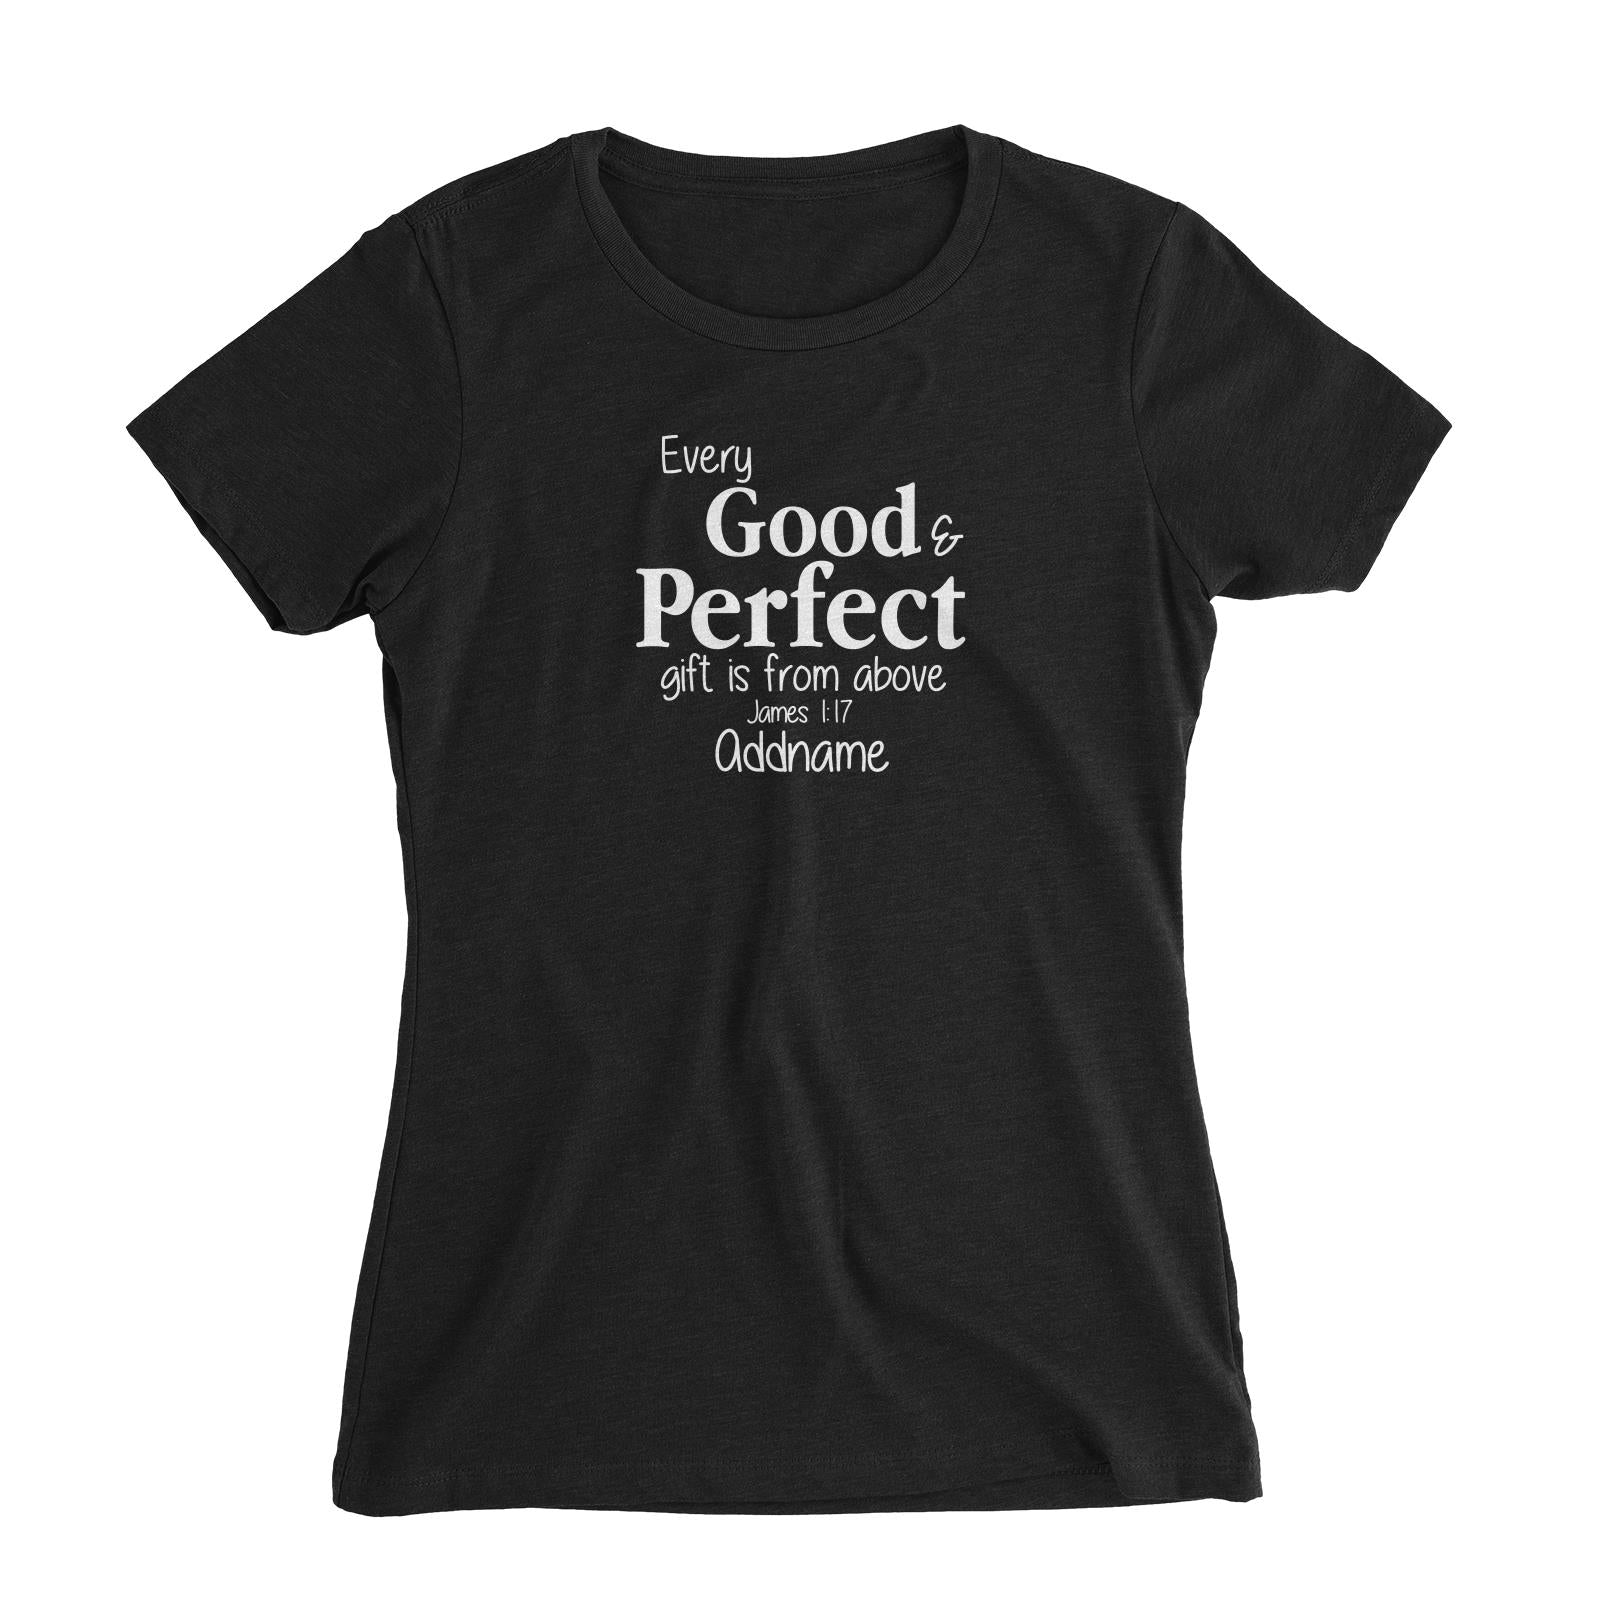 Christ Newborn Every Good and Perfect Gift is from Above James 1.17 Addname Women Slim Fit T-Shirt